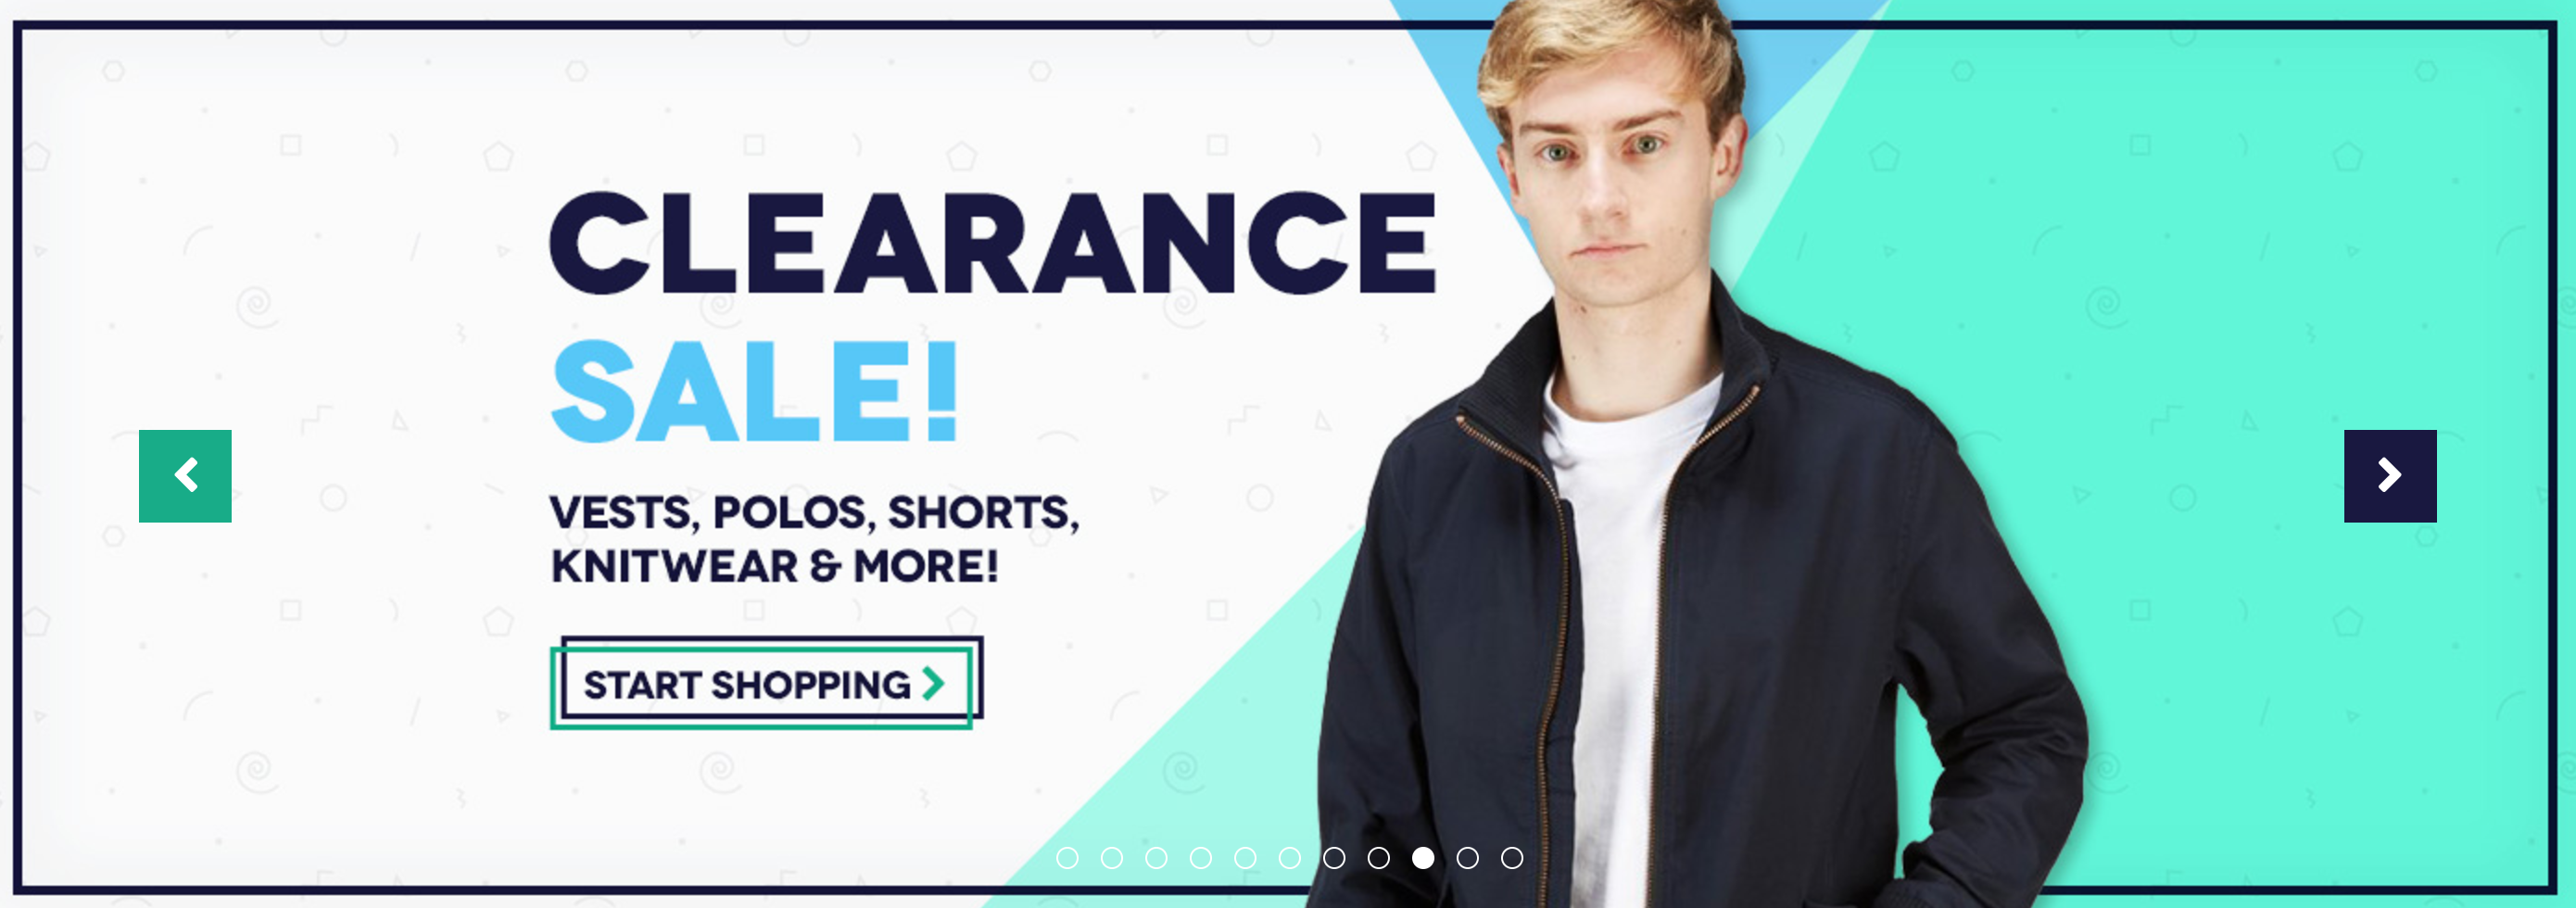 Charles Wilson Charles Wilson: Clearance Sale up to 70% off vests, polos, shorts, knitwear & more